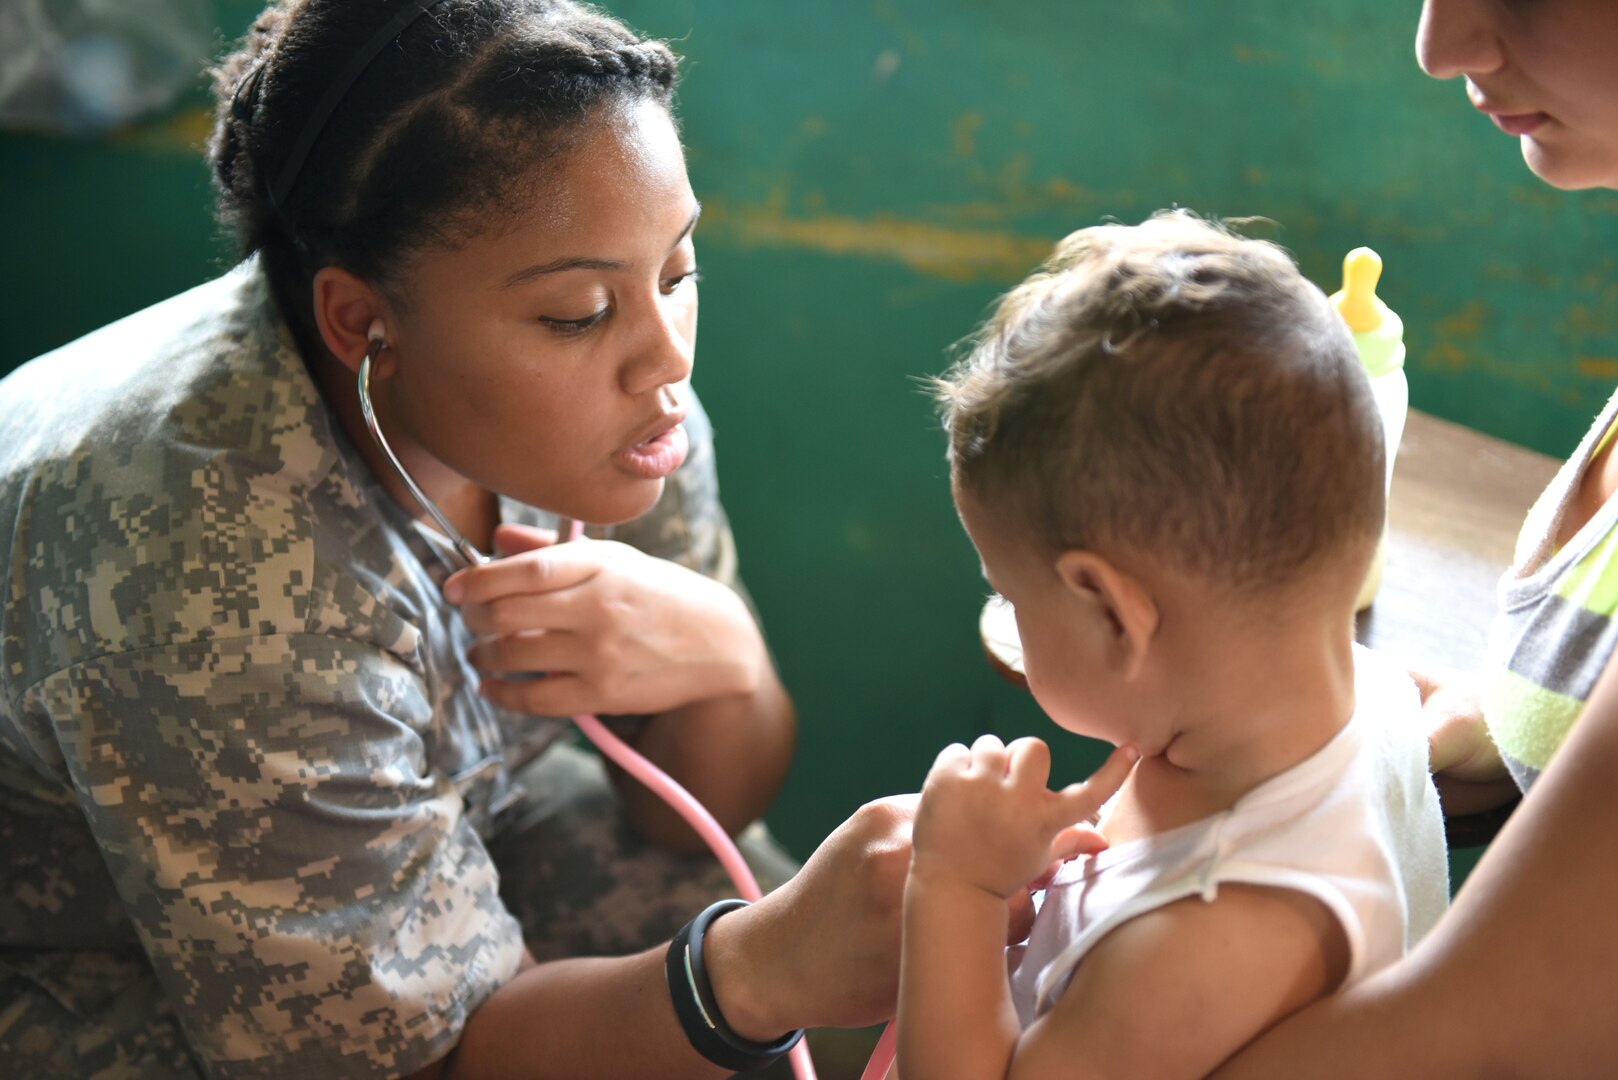 U.S. Army Spc. Gloria Galbearth, Joint Task Force-Bravo Medical Element, checks a child’s vital signs during a Medical Readiness Training Exercise in Corinto, Cortes, Feb. 16, 2017. Galbearth was assigned to the filtering section of the MEDRETE where patients were examined prior to seeing a provider. (U.S. Army photo by Maria Pinel)